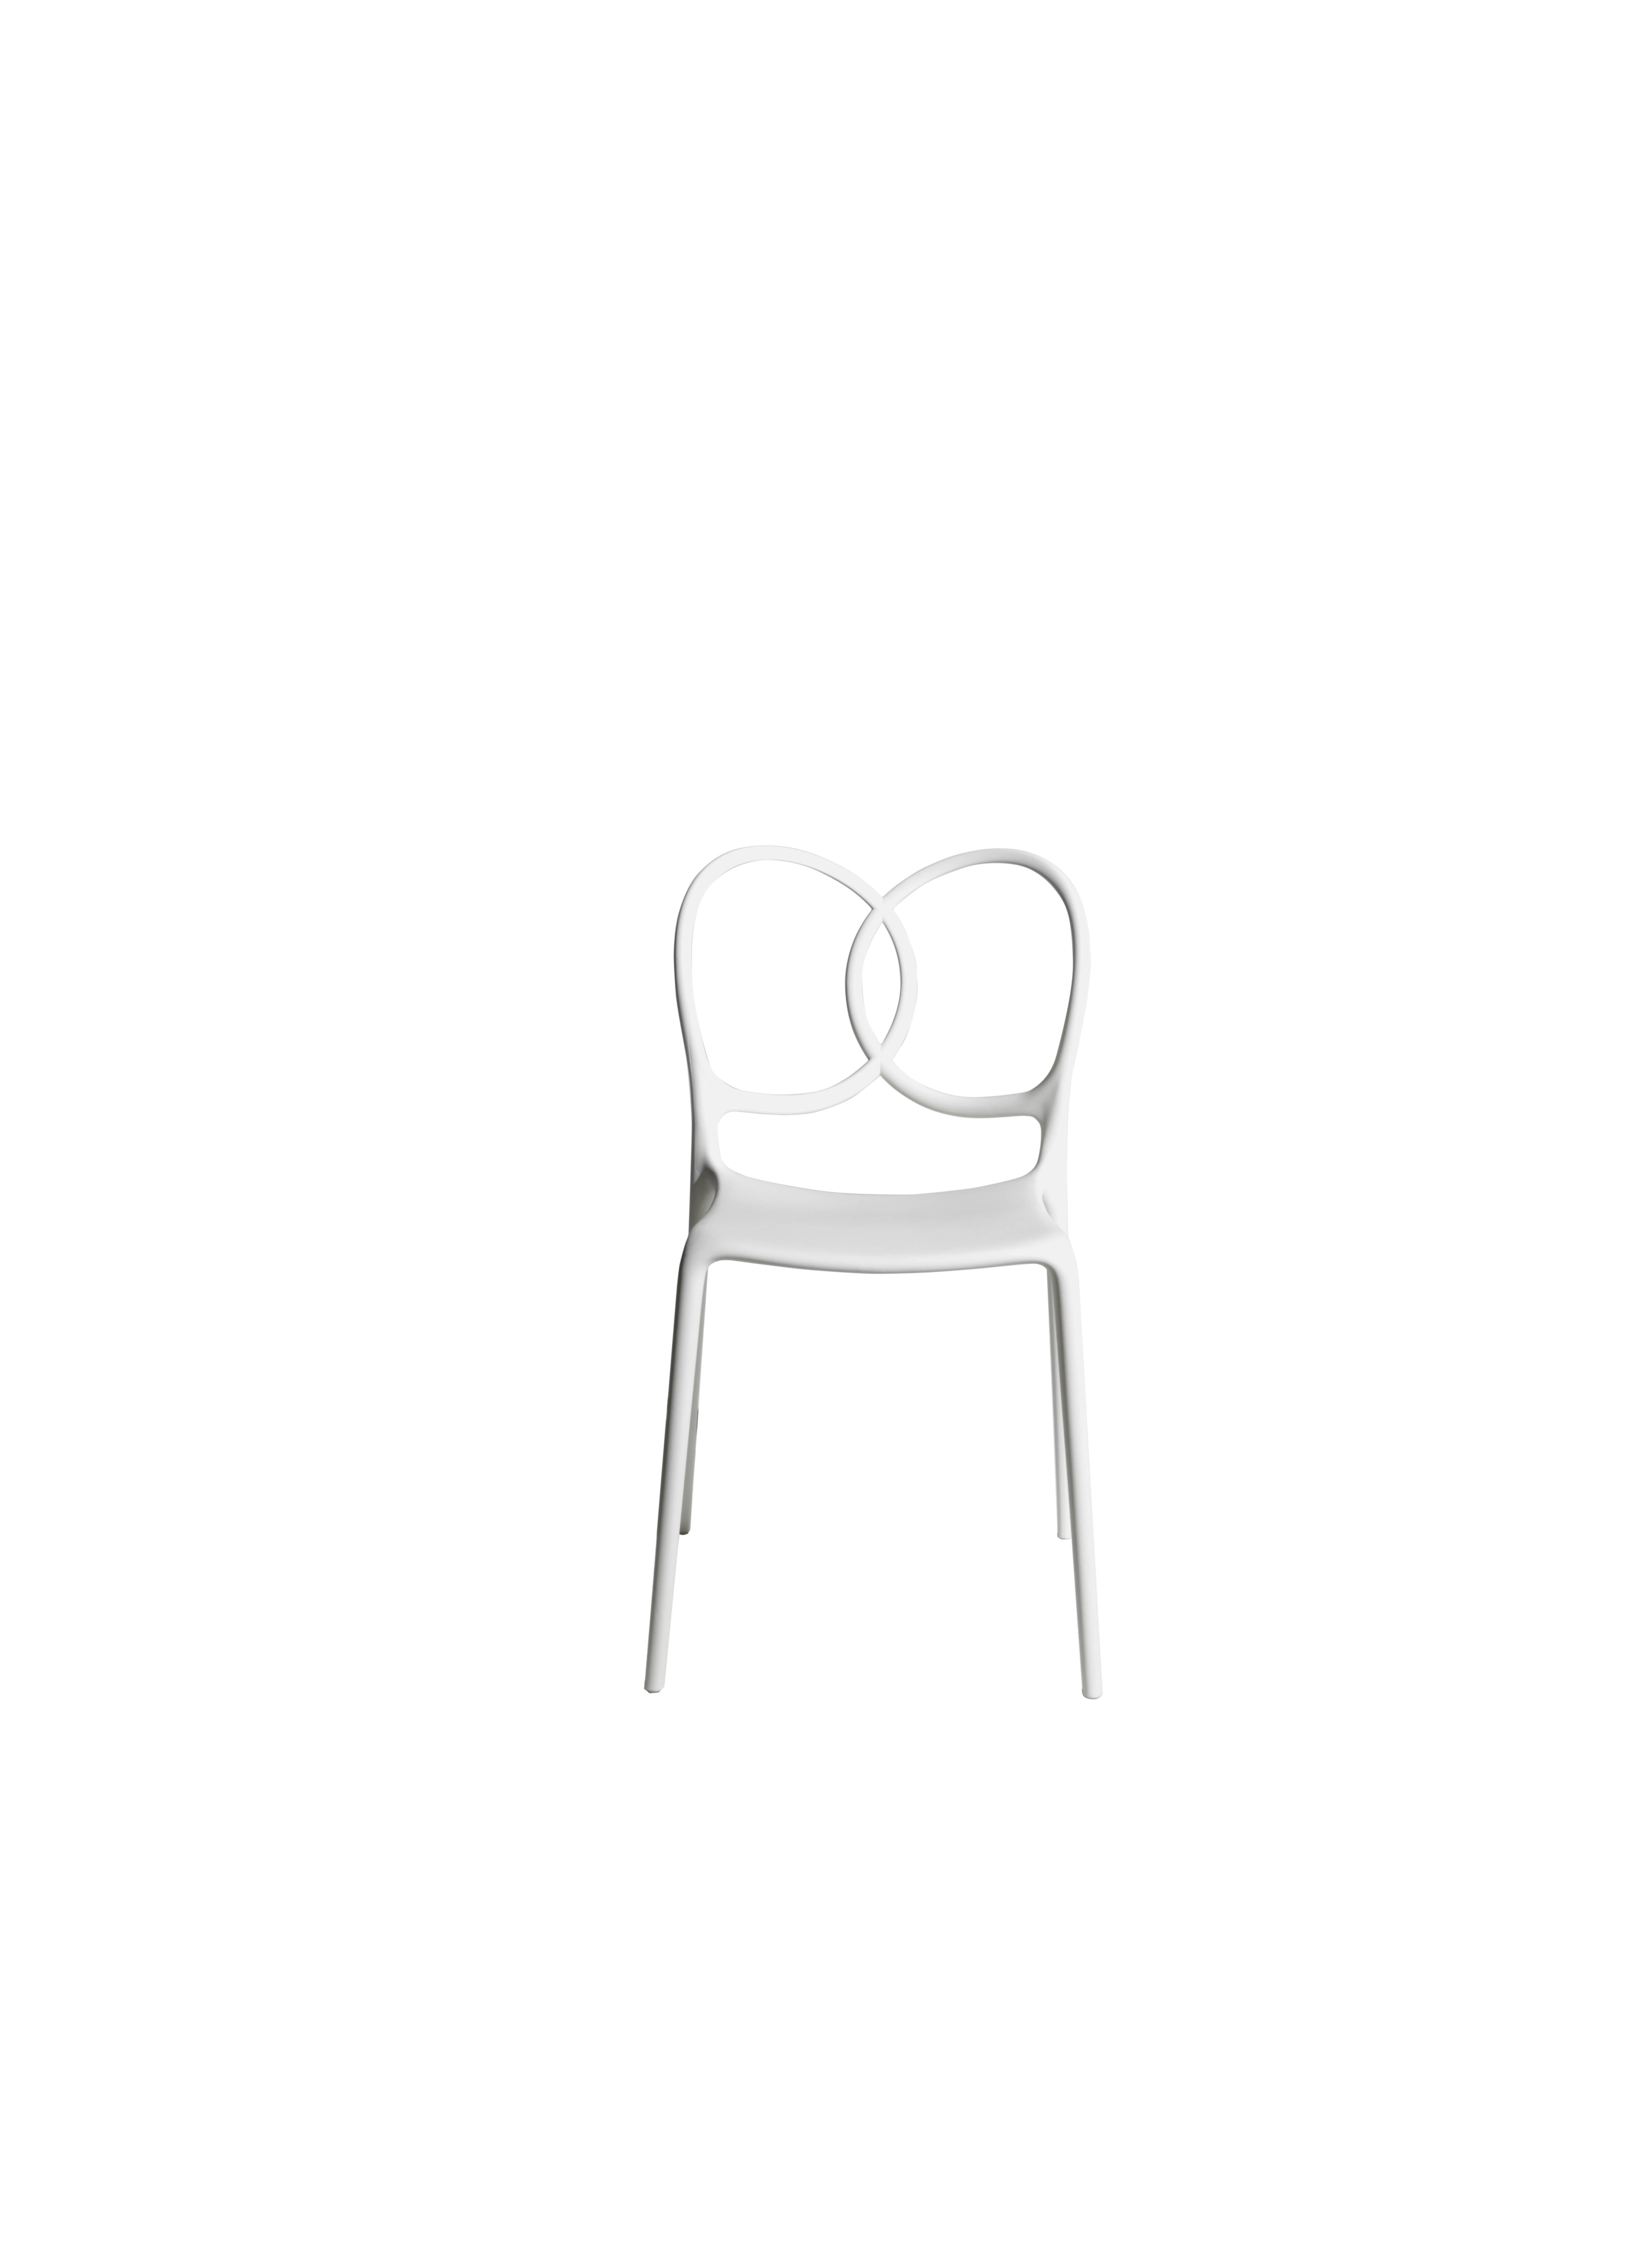 The new chair designed by Ludovica+Roberto Palomba and manufactured by Driade – Sissi - is a sculptural, very versatile, self-centred and contemporary piece. Sissi is made in polypropylene copolymer with glass fiber, natural polyethylene semisoft